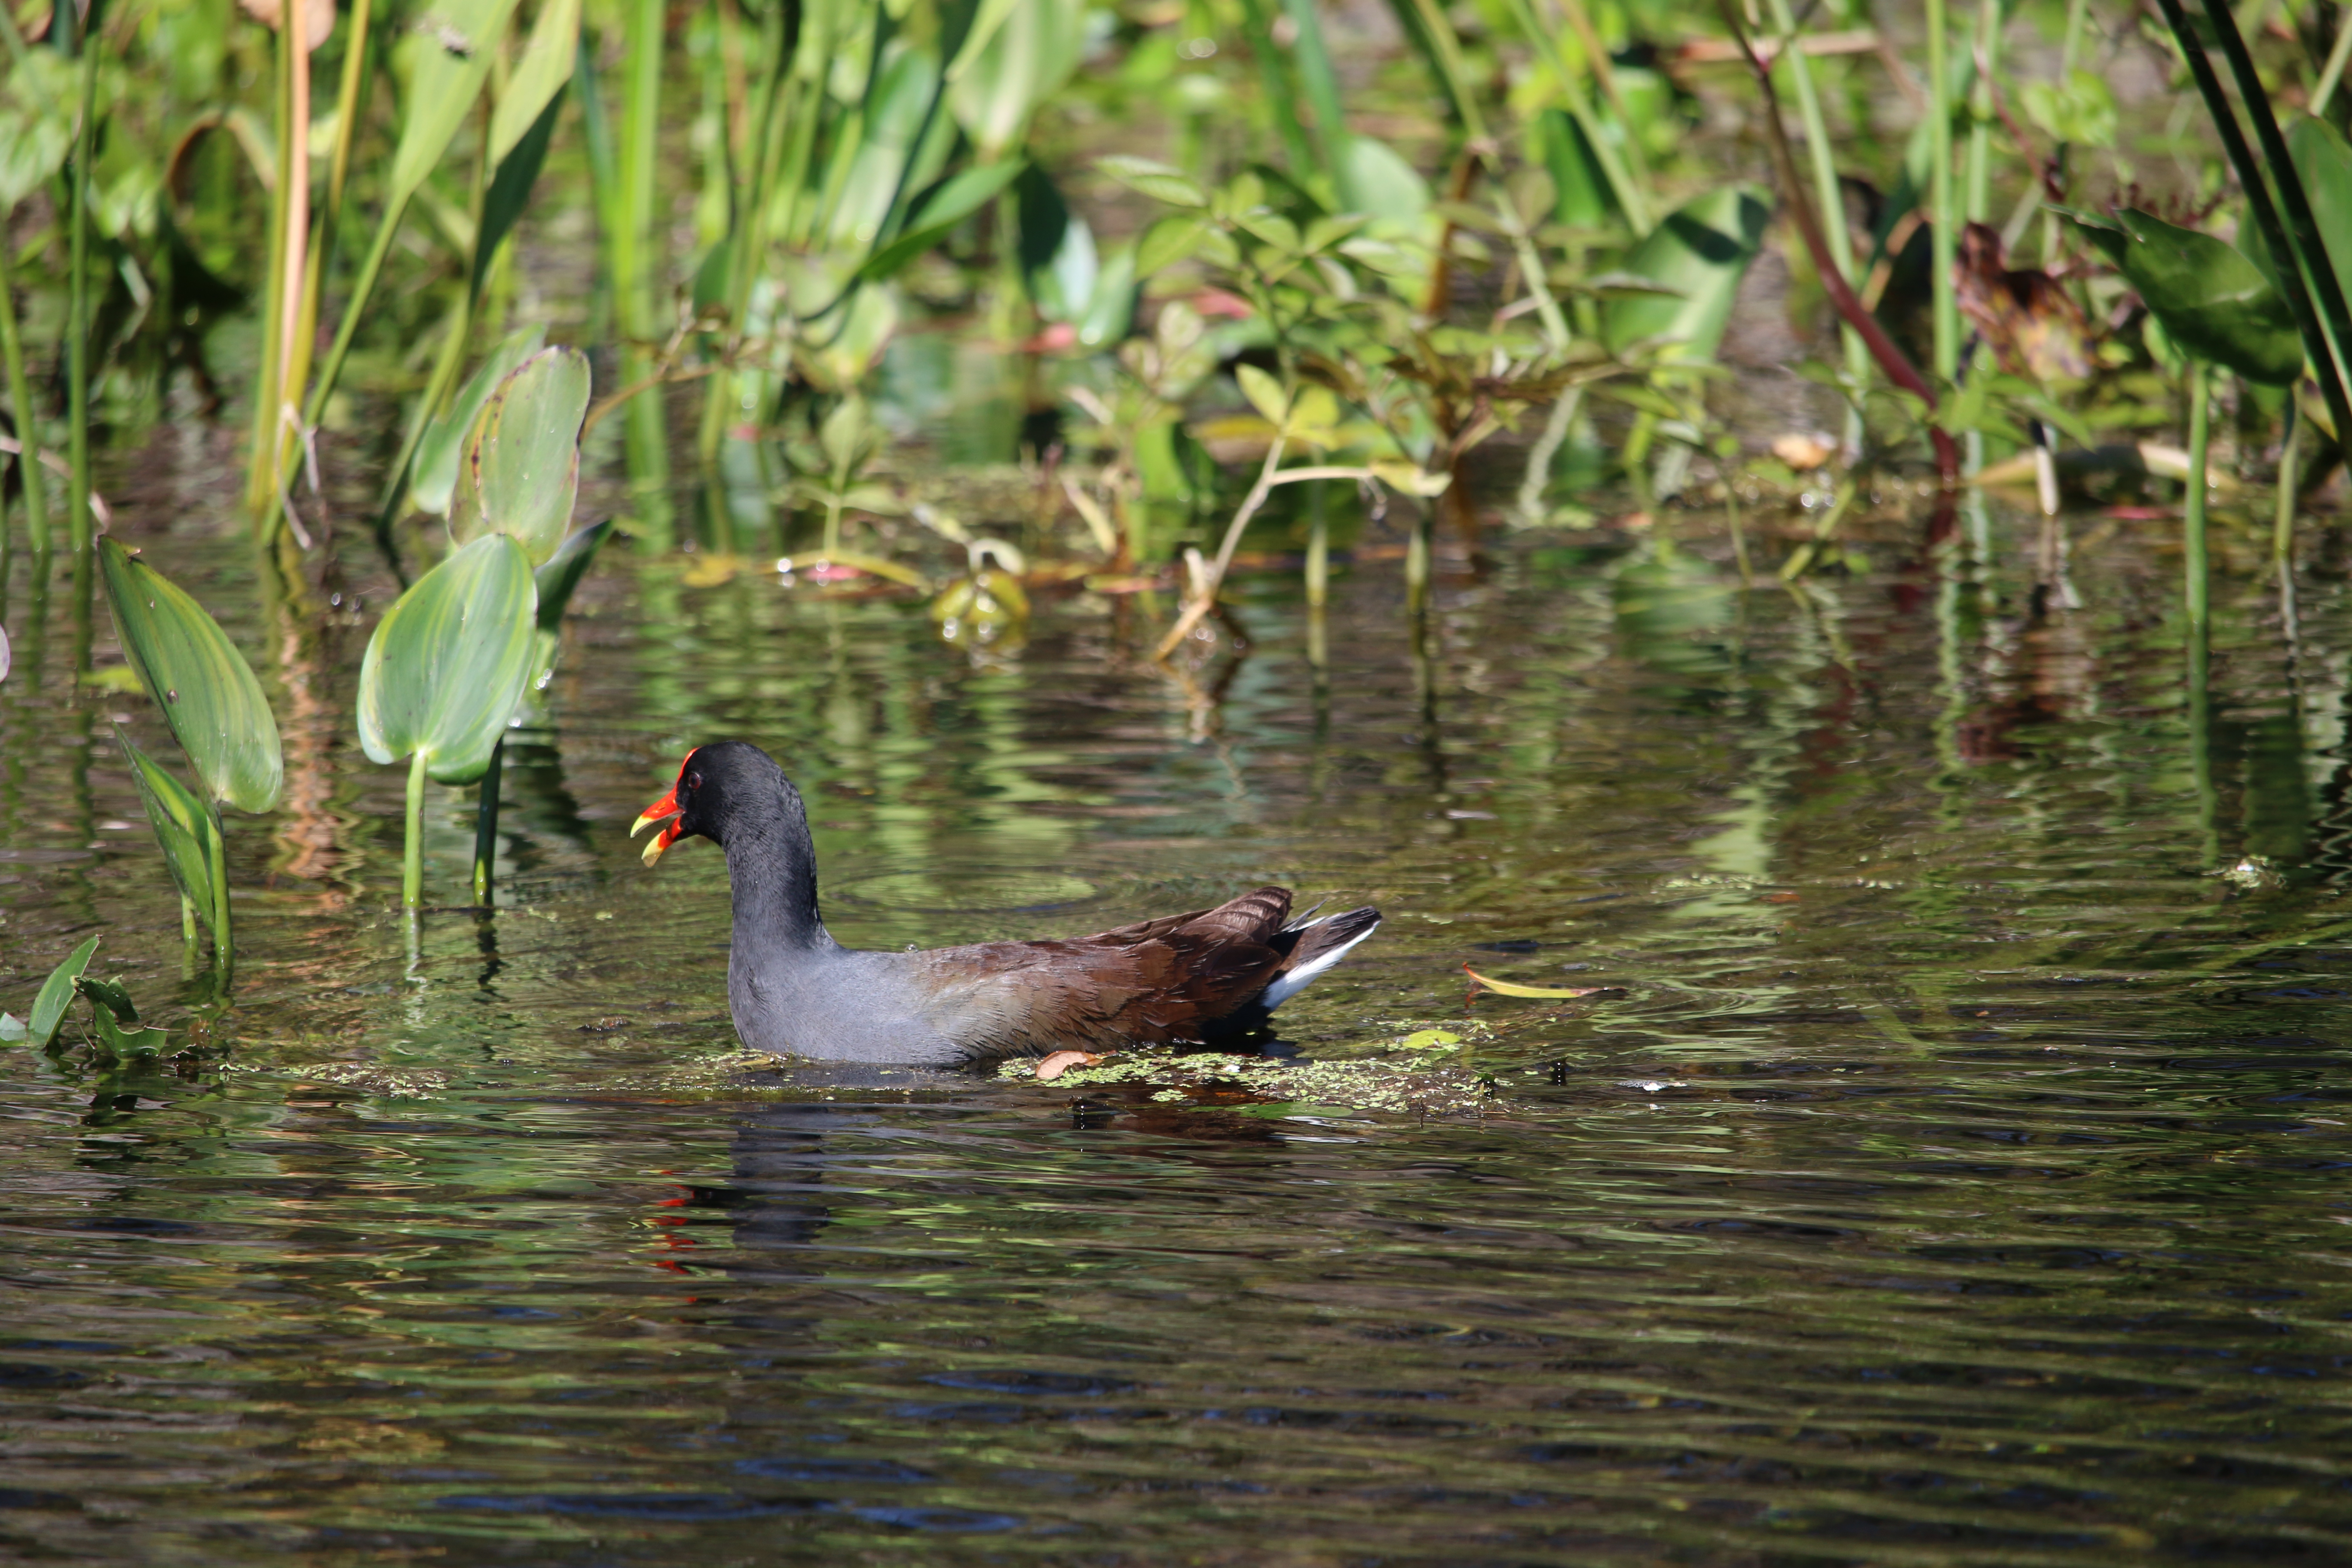 Common Gallinule swimming in the water, with reeds in the background. Photo: Erika Zambello.